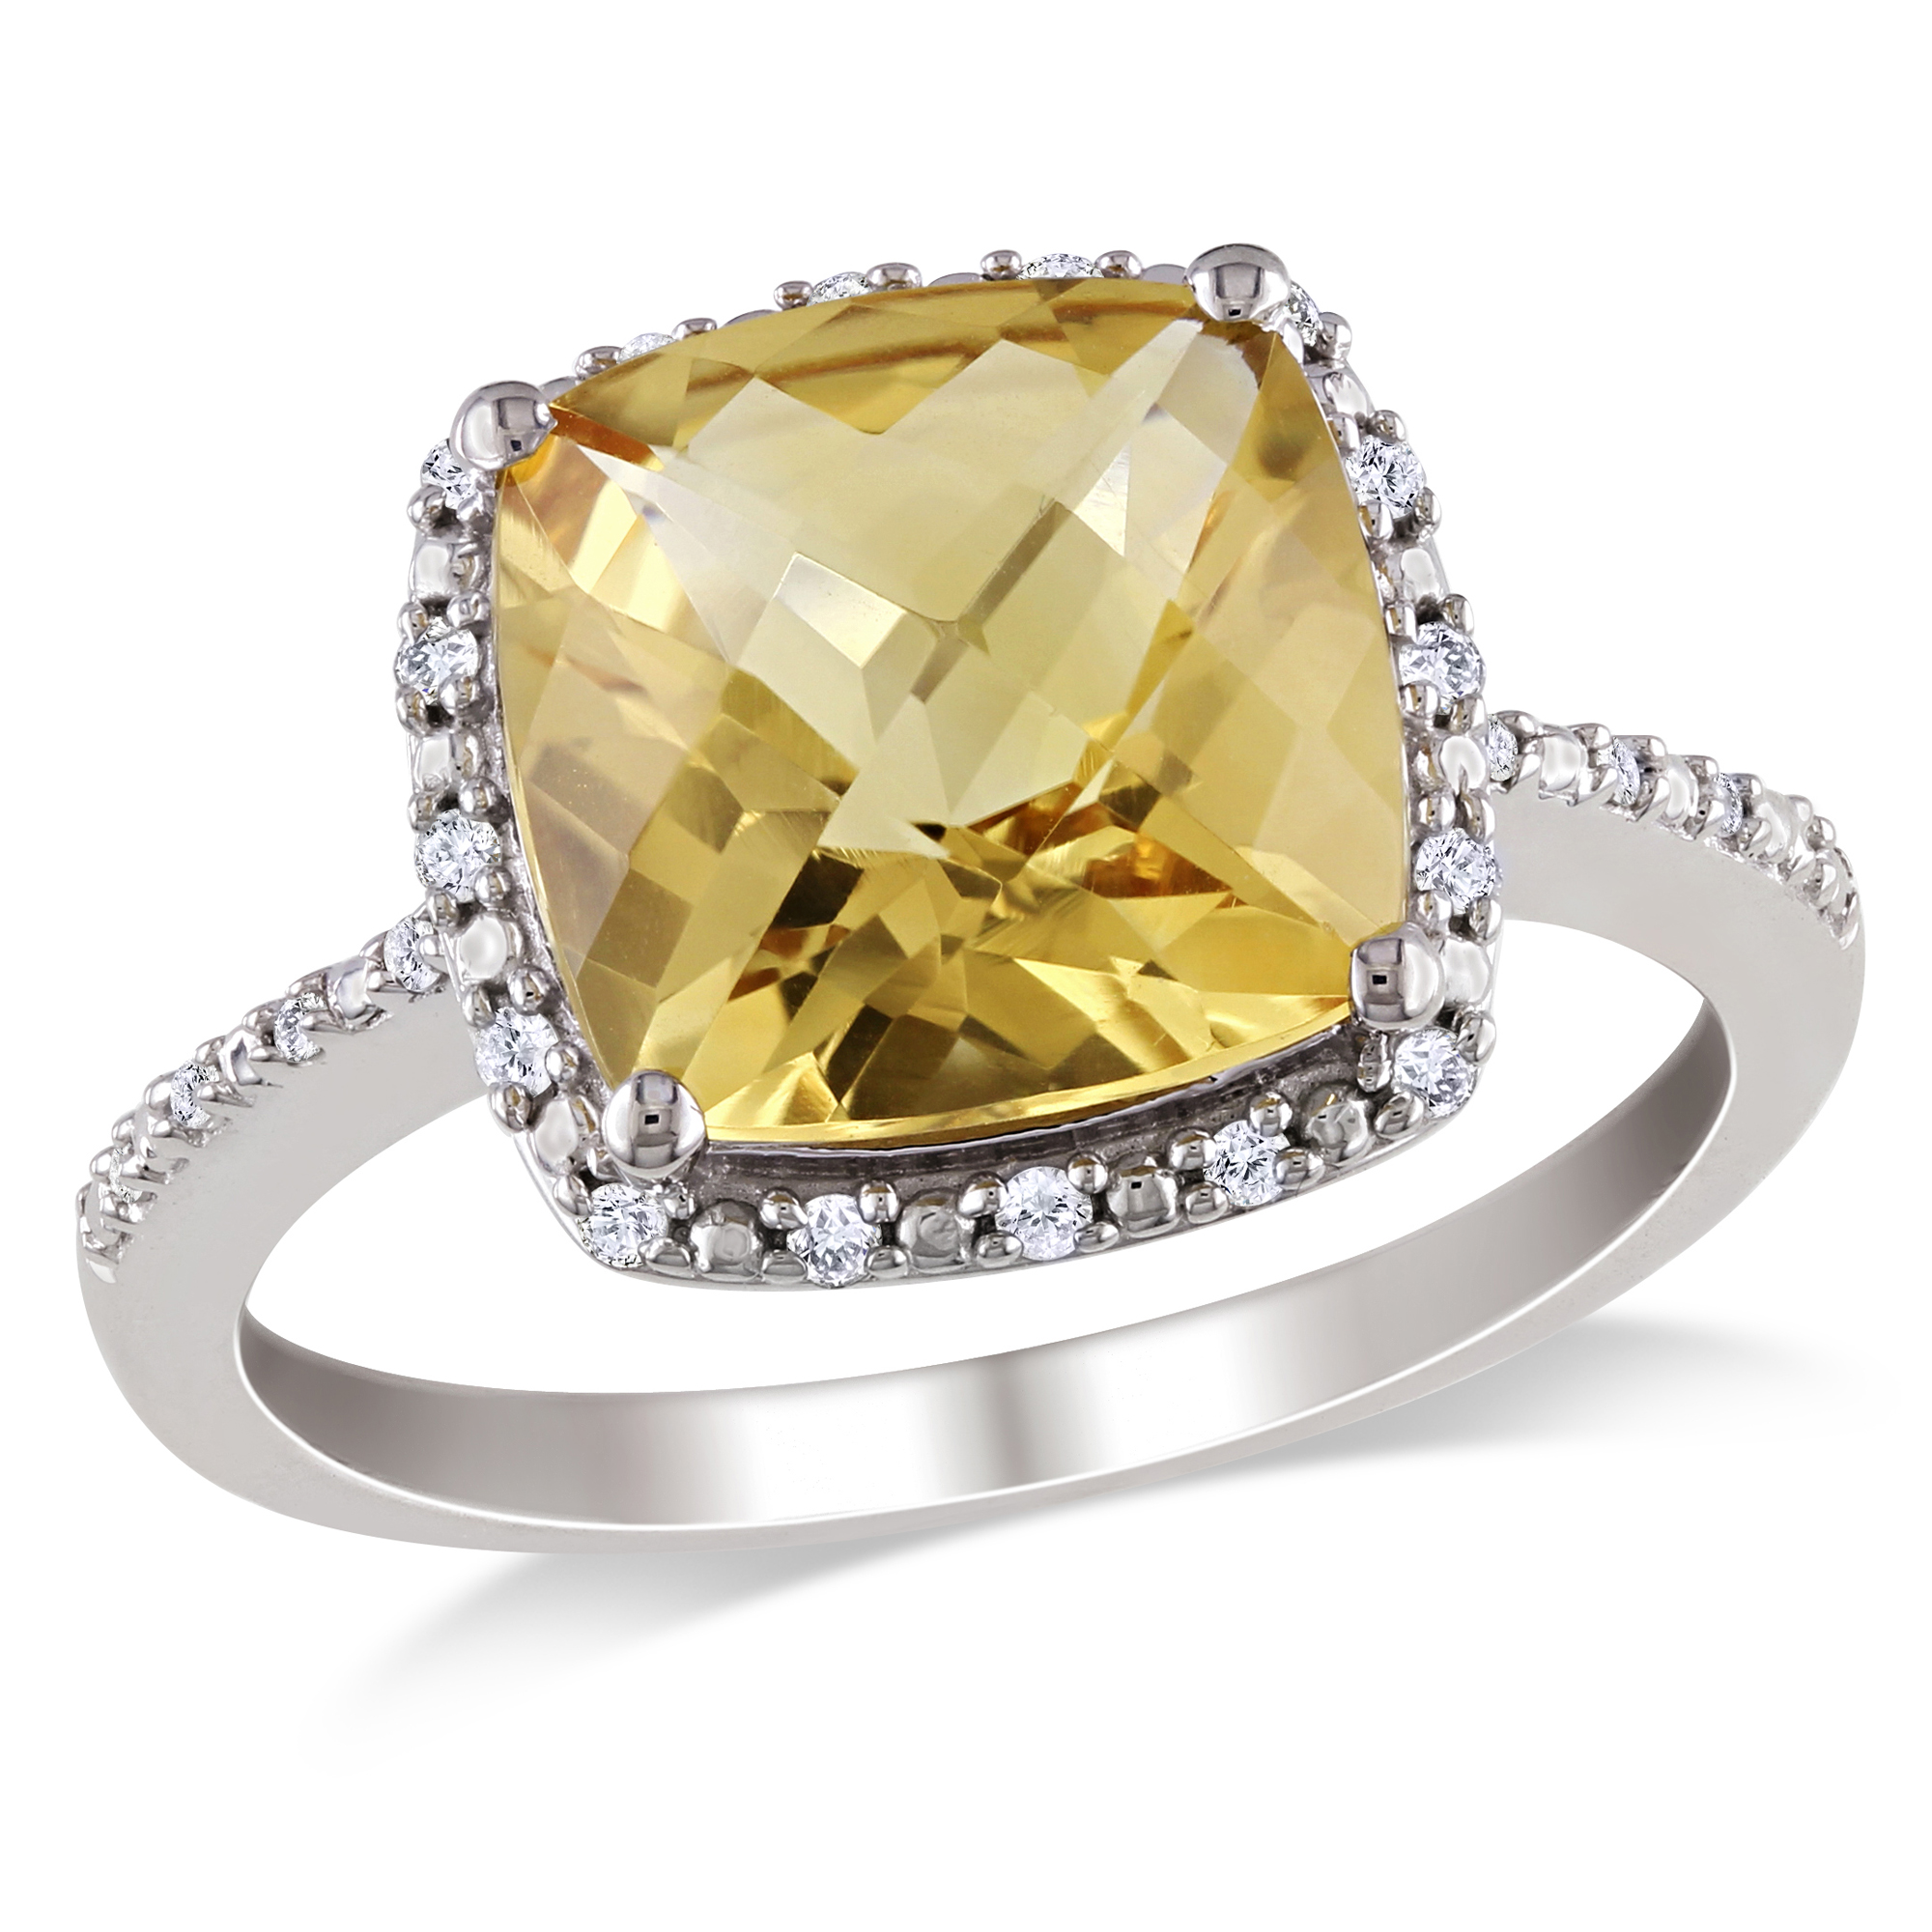 1/10 Carat T.W. Diamond and 4 Carat T.G.W. Citrine Fashion Ring in Sterling Silver GH I3